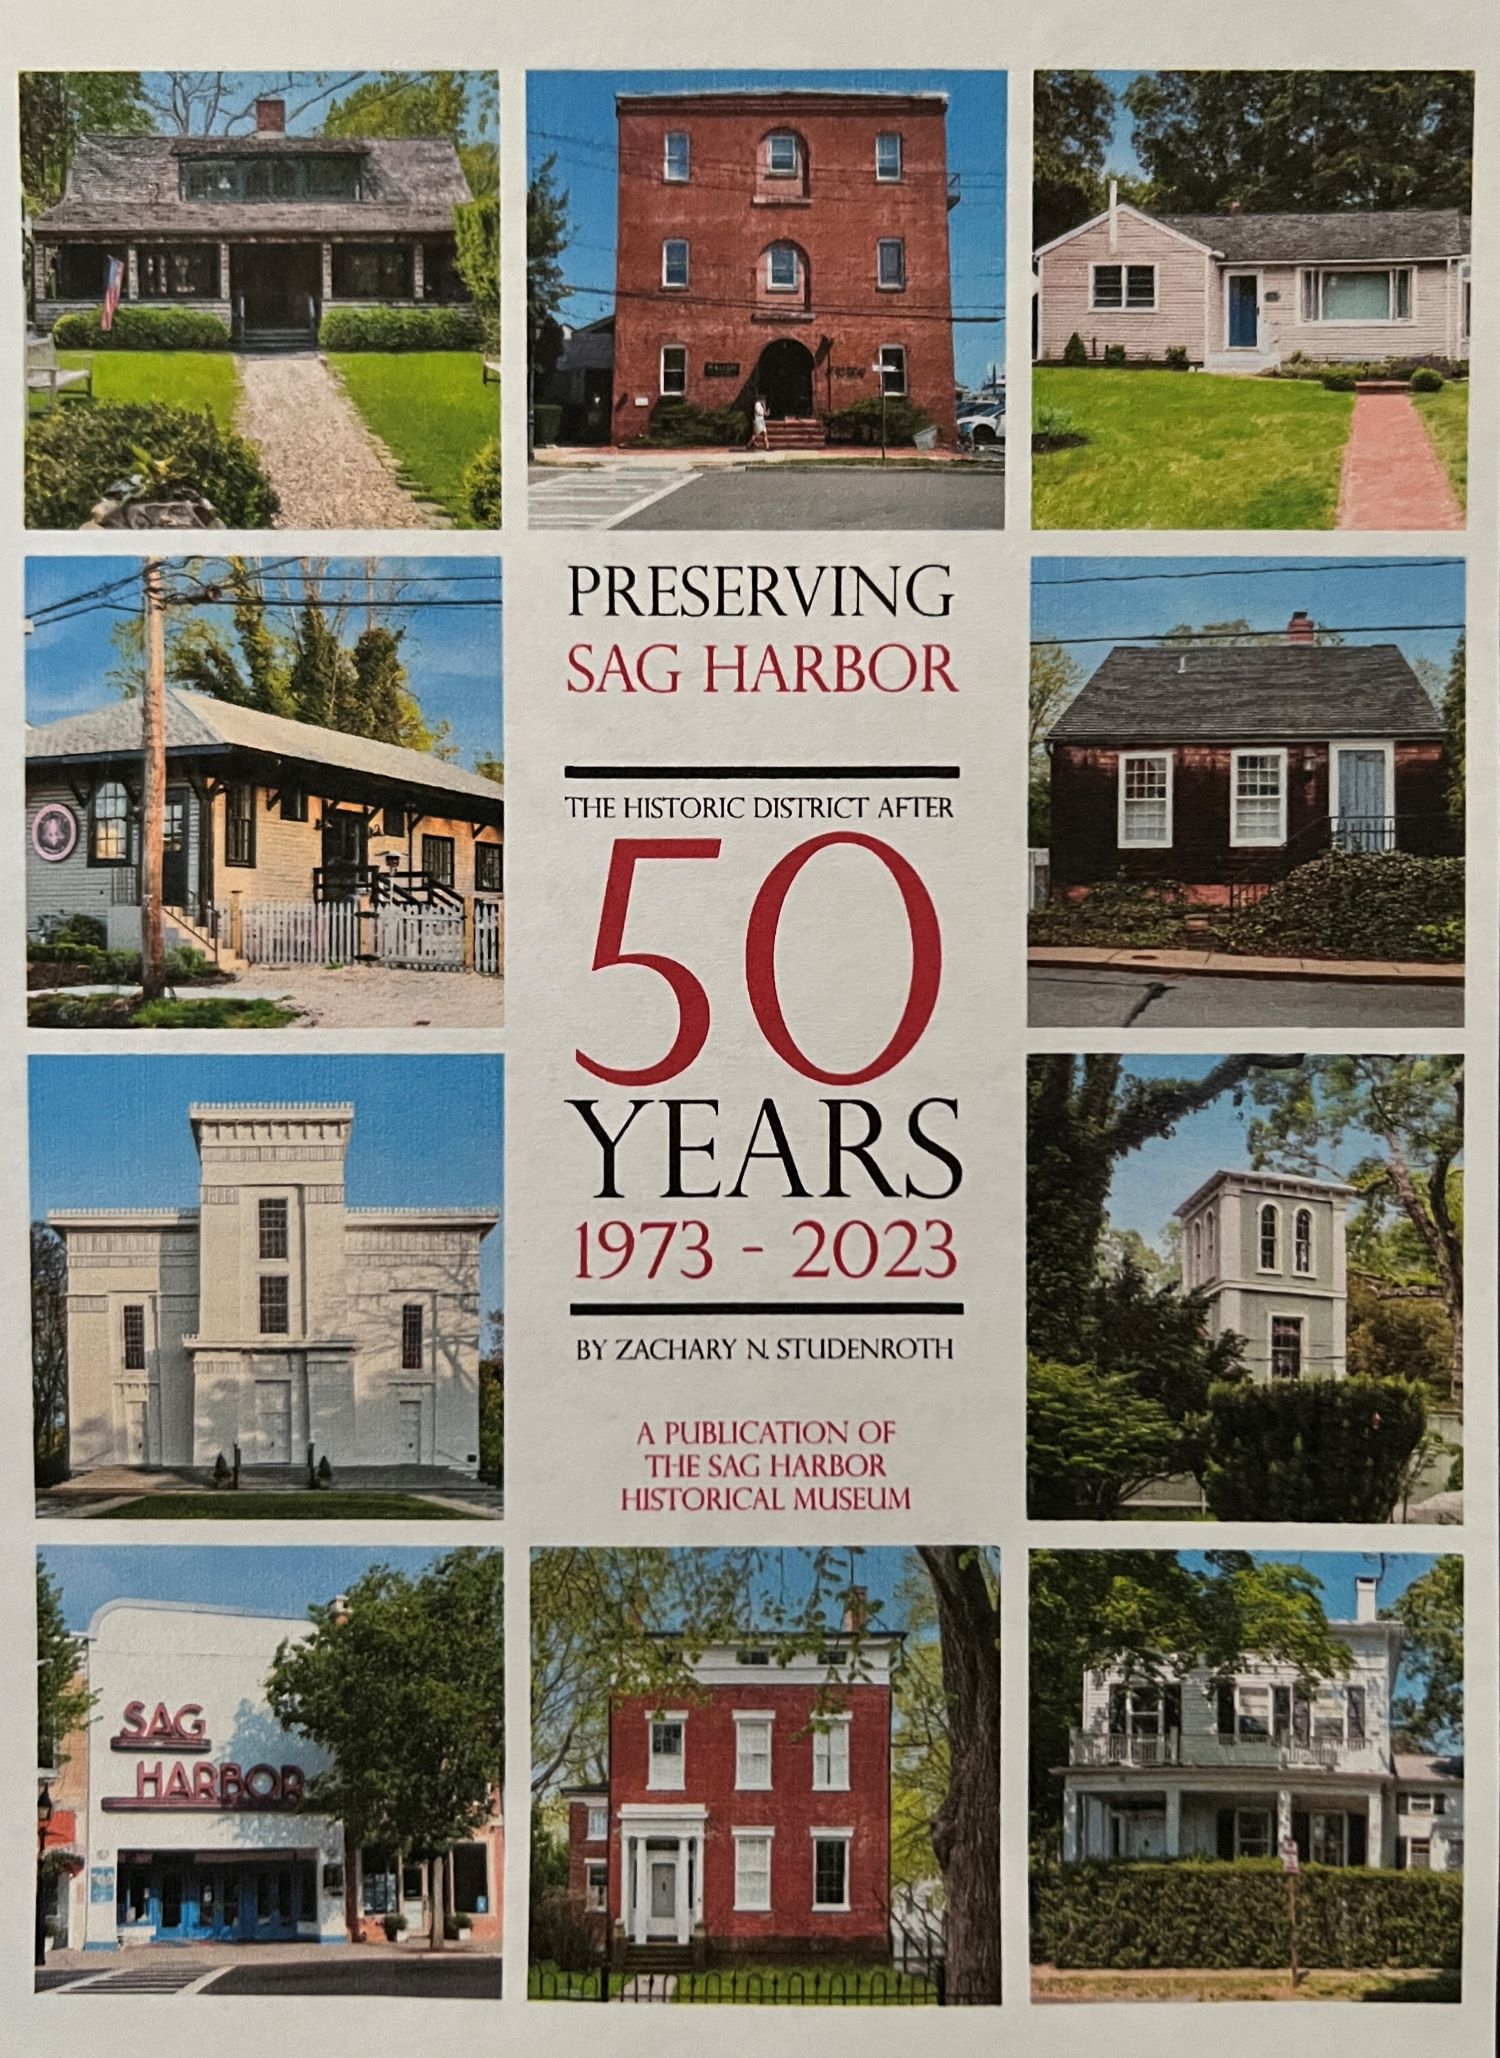 Preserving Sag Harbor The Historic District After 50 Years    1973-2023 by Zachary N. Studenroth